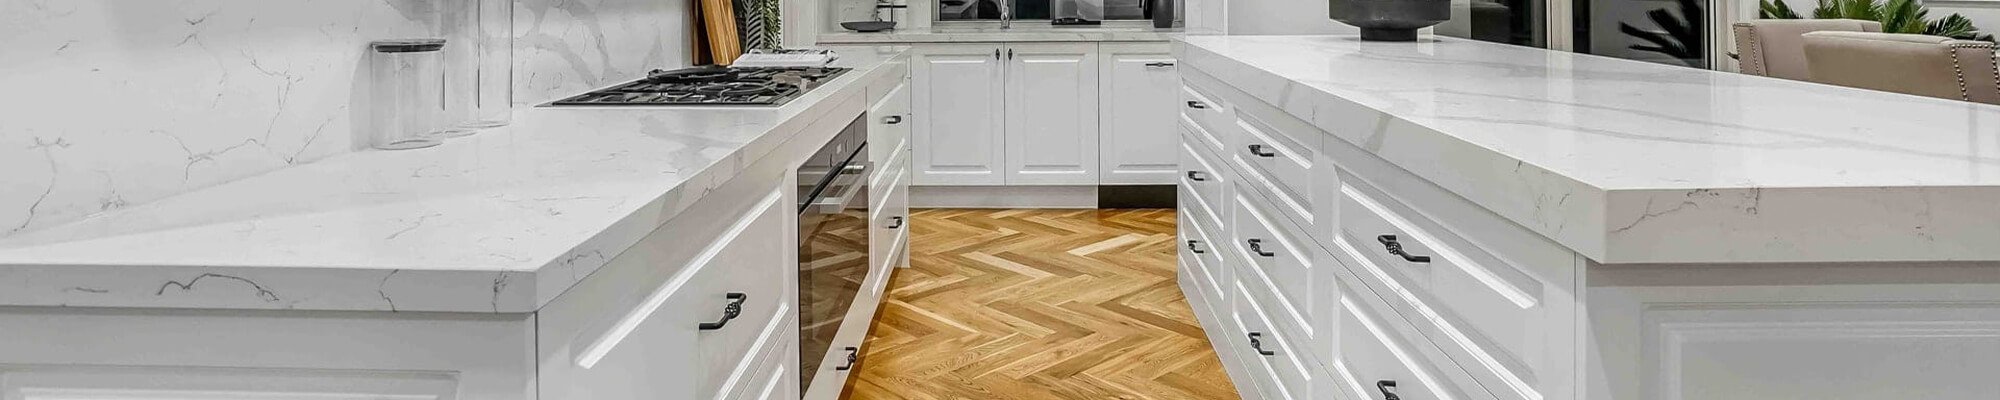 Flooring installation services provided by Marquis Floors in Lilburn, GA